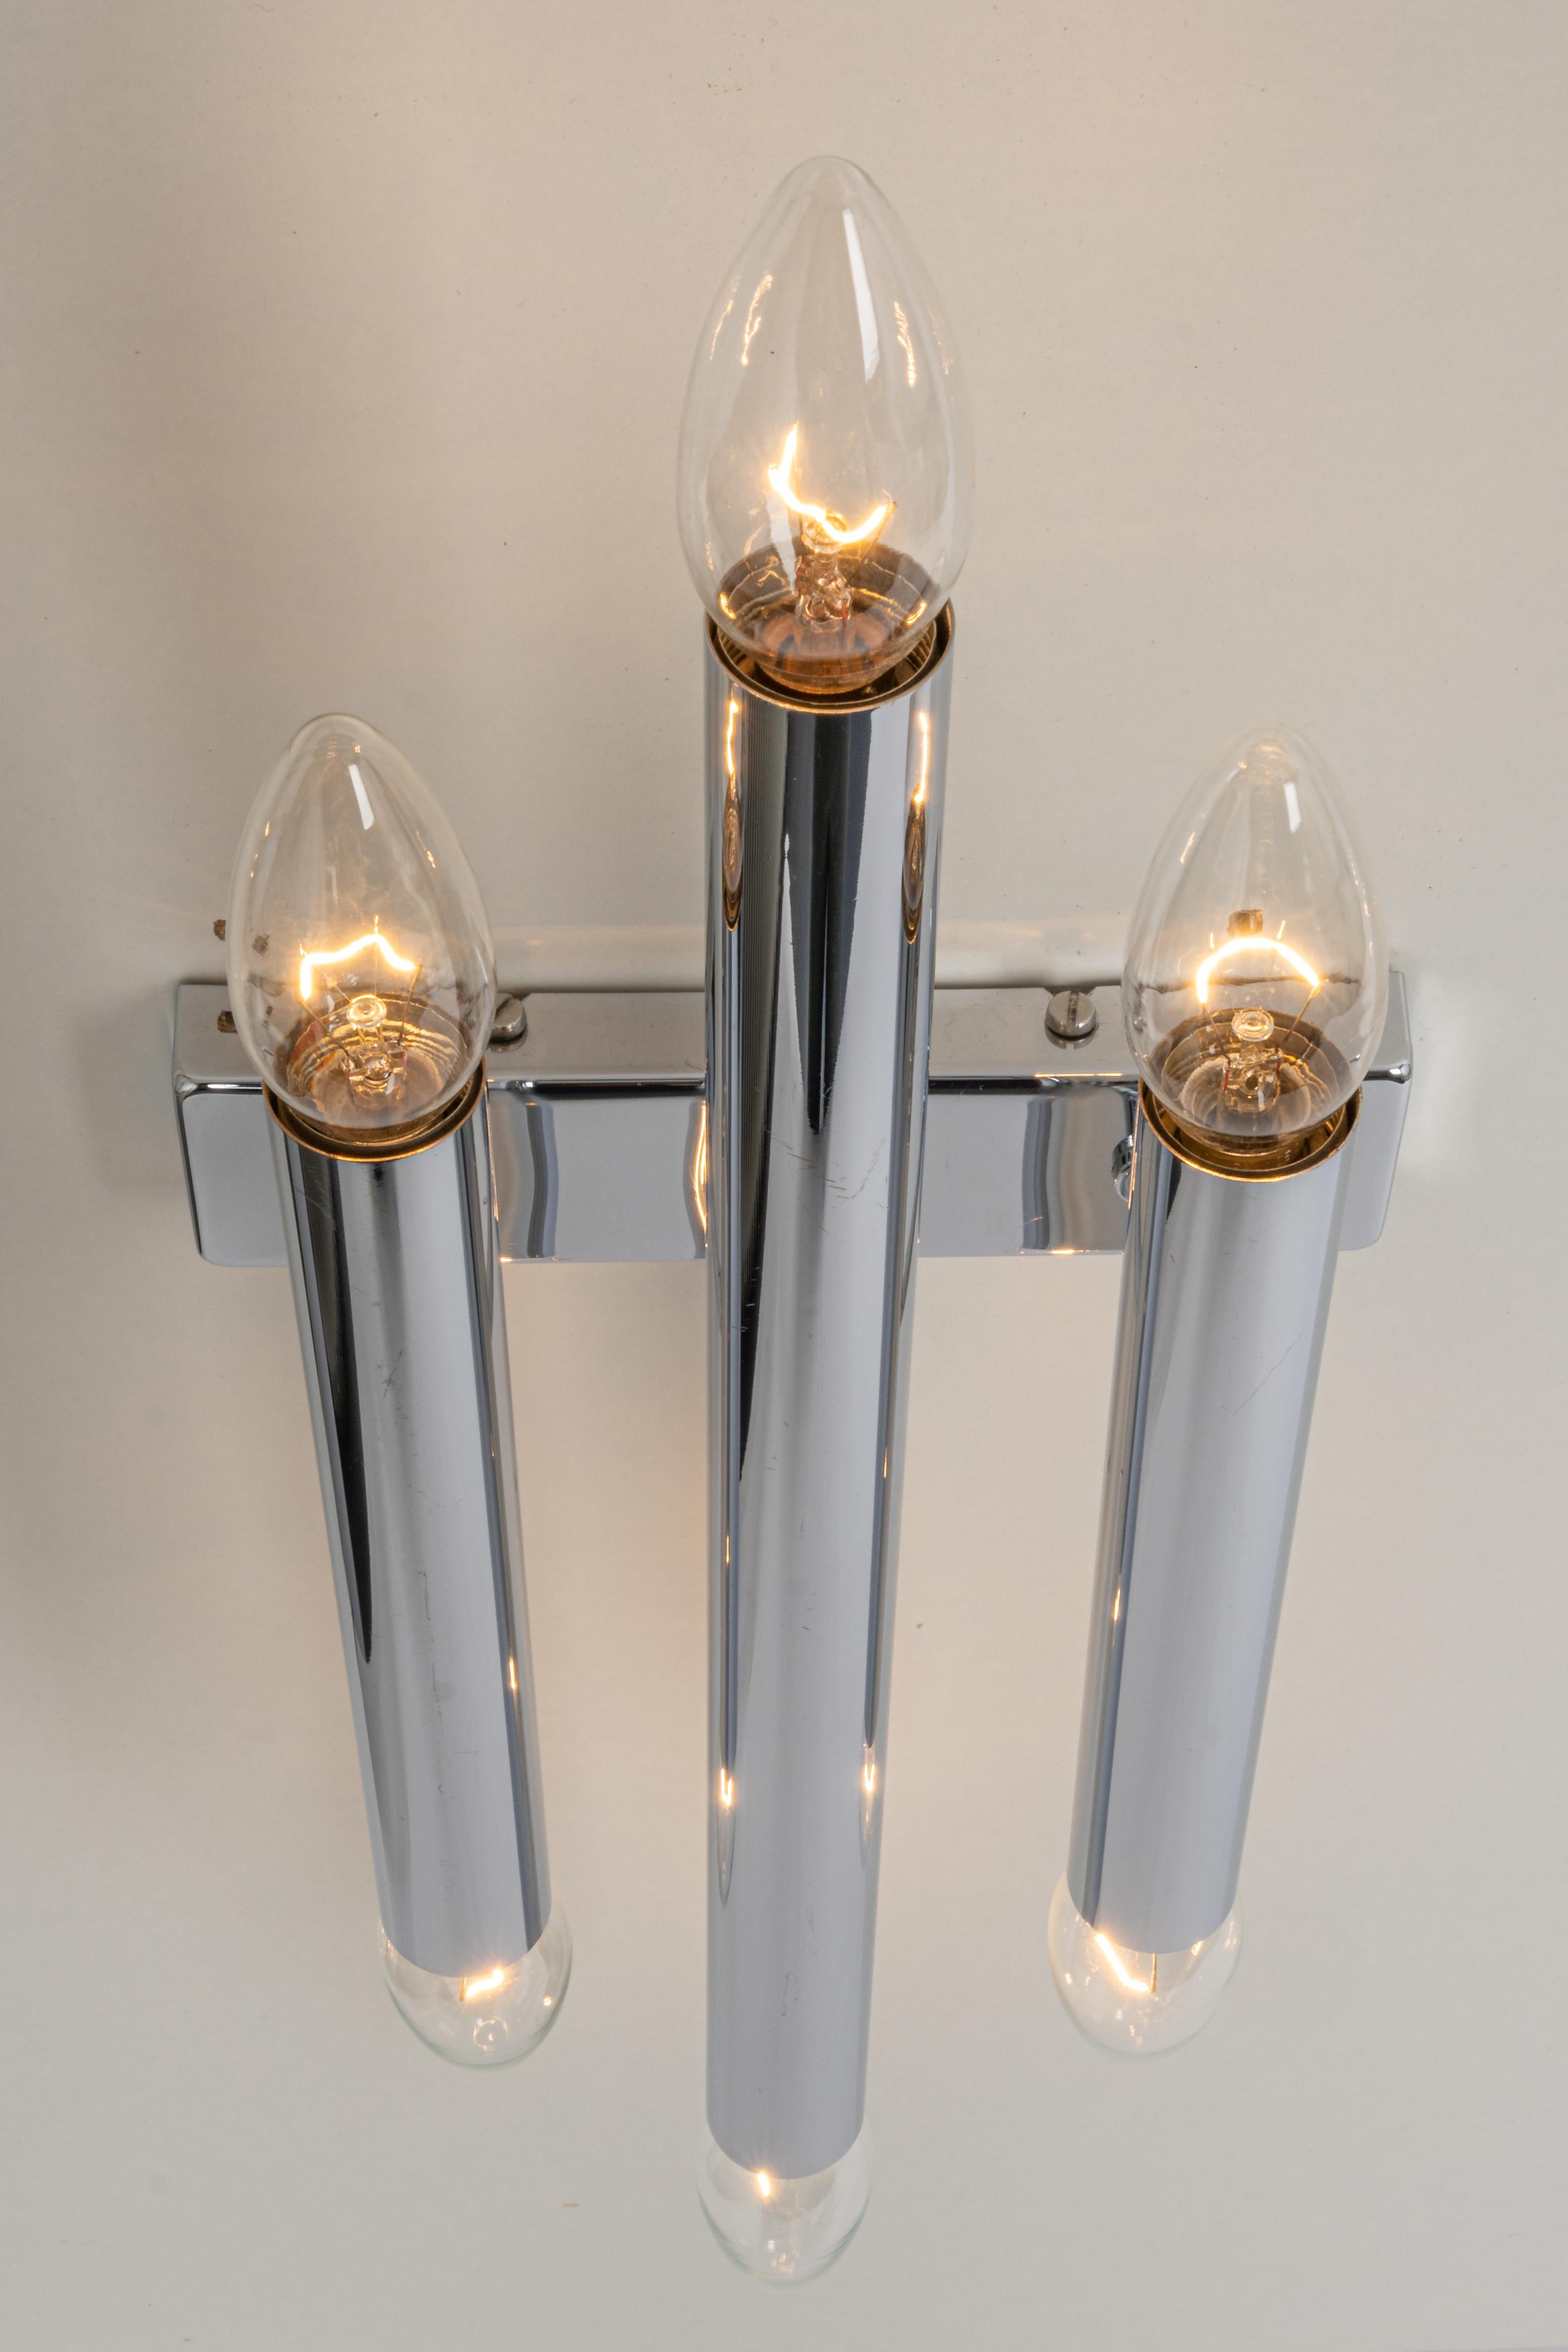 Pair of Large Italian Chrome Wall Sconces Sciolari Style, 1970s For Sale 2